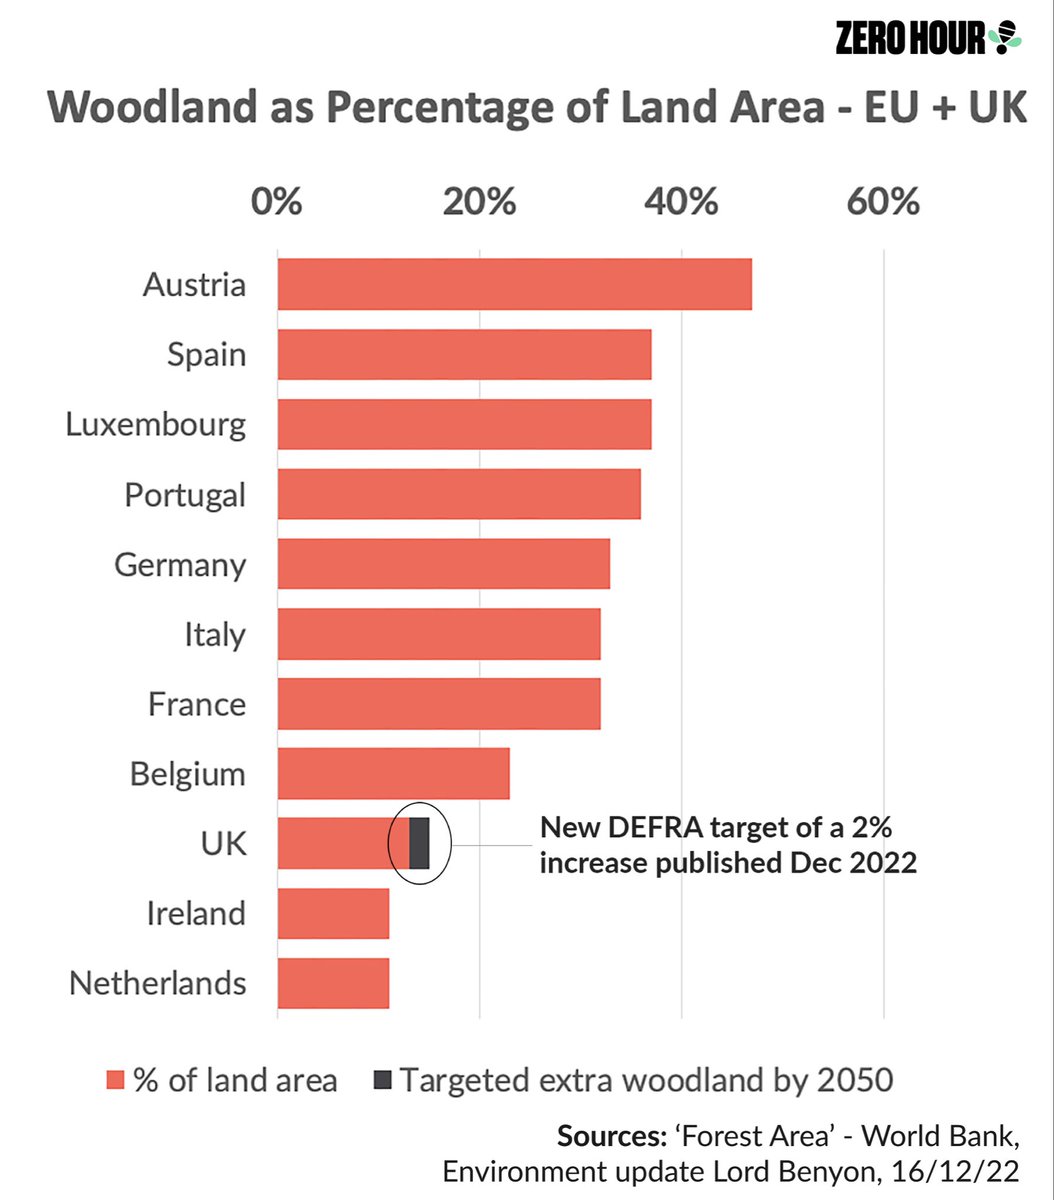 The UK’s 2% target for new woodland over 10 years is woefully inadequate. We need far more ambition. Costa Rica did it 👇